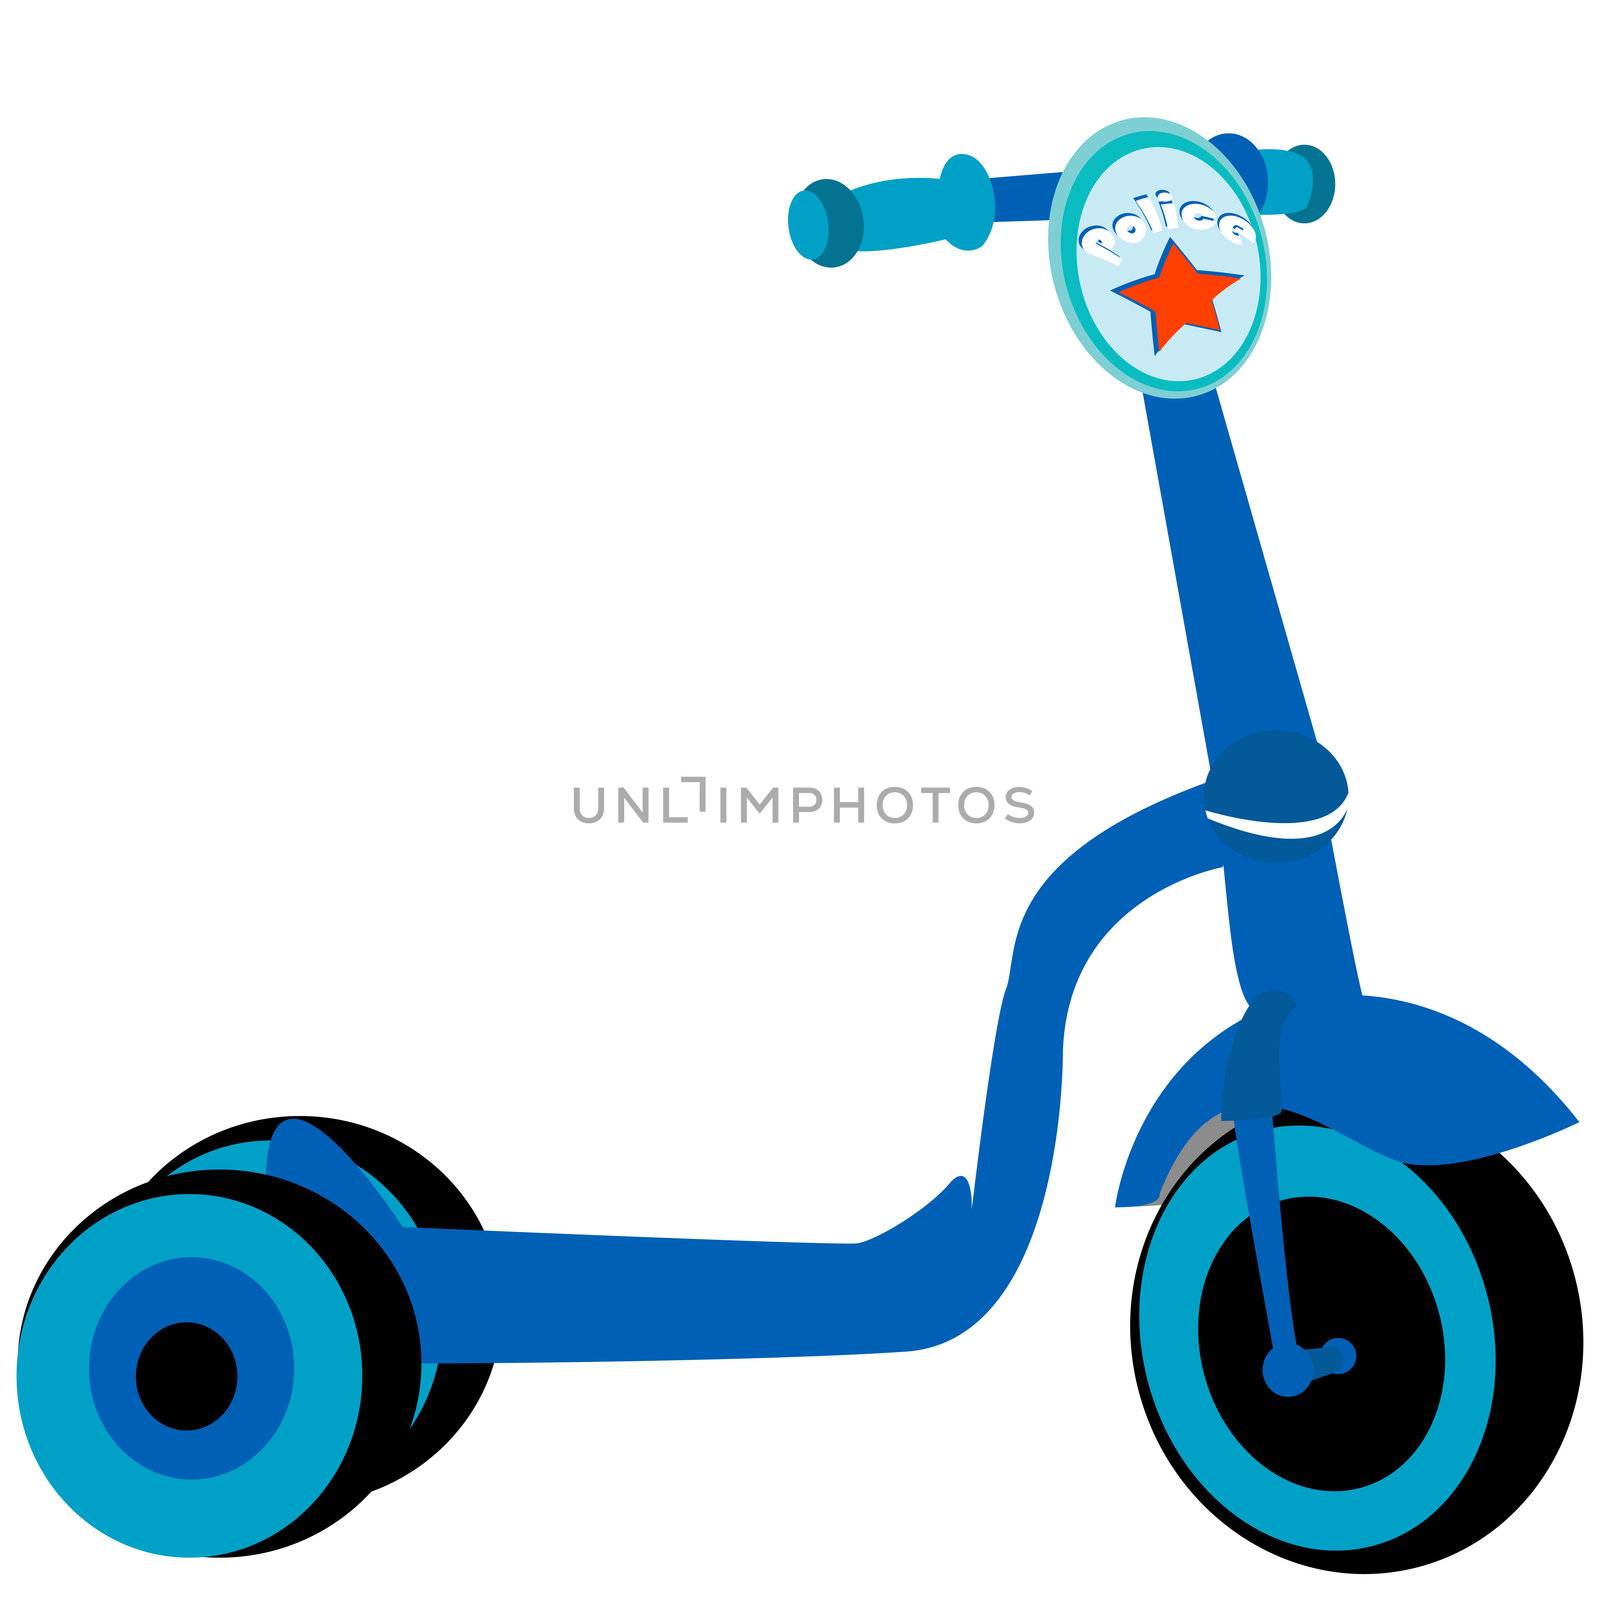 Police toy scooter, isolated object on white background